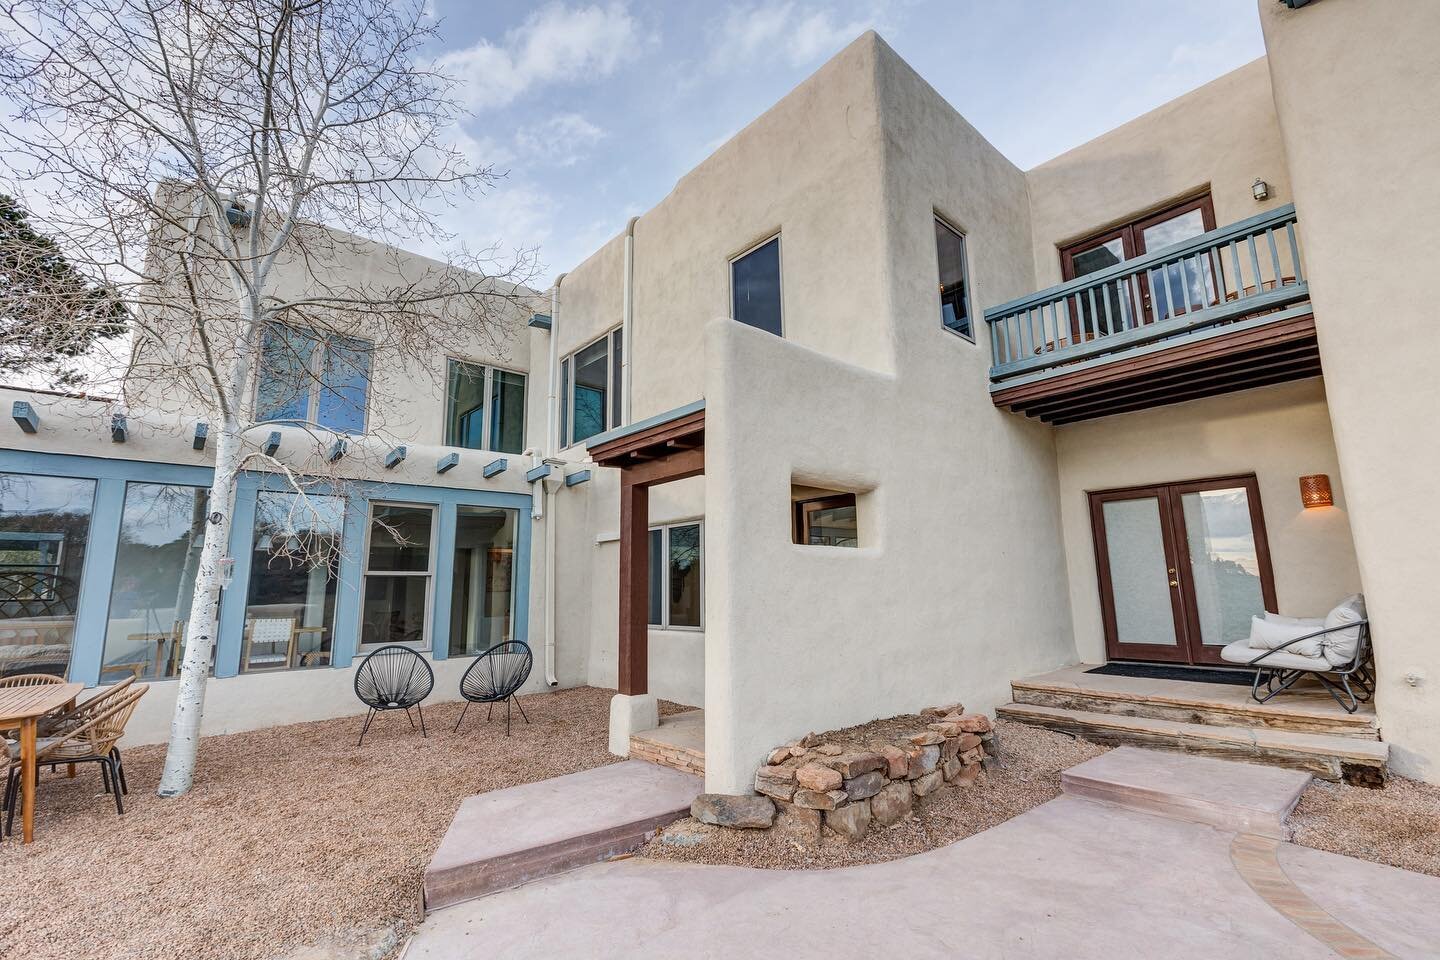 Swipe to see the exterior before our renovation🏡

#santafe #newmexico #adobe #boho #adobestyle #interiordesign #santafedesign  #hgtv #renovation #santafelife #rental